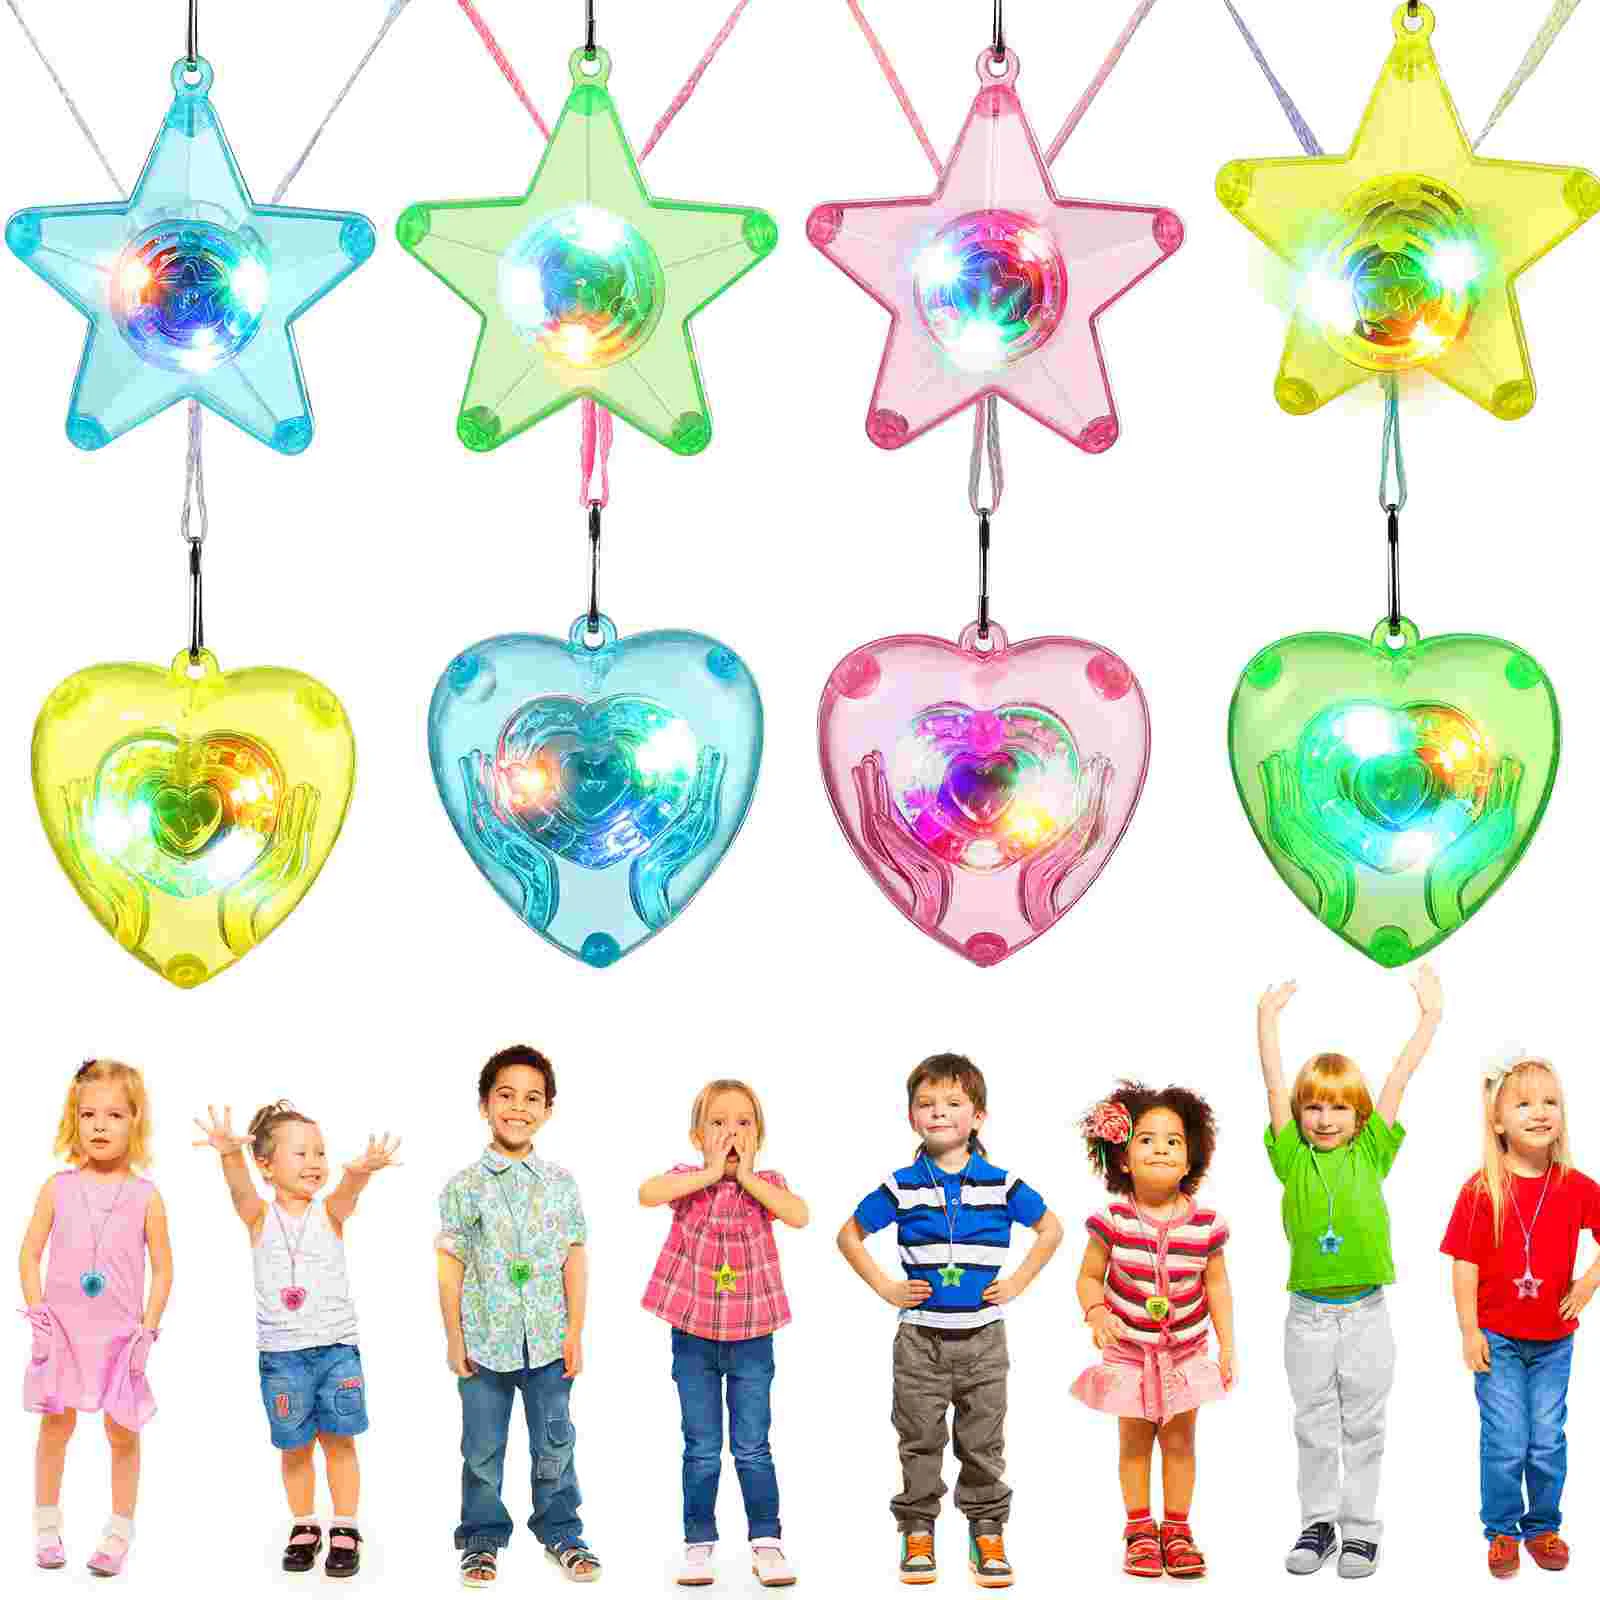 

8 Pcs Party Necklaces Halloween The Gift Heart-shaped Light Pendant Bulb Adults Rave Accessories Lovers Bulk Items Gifts